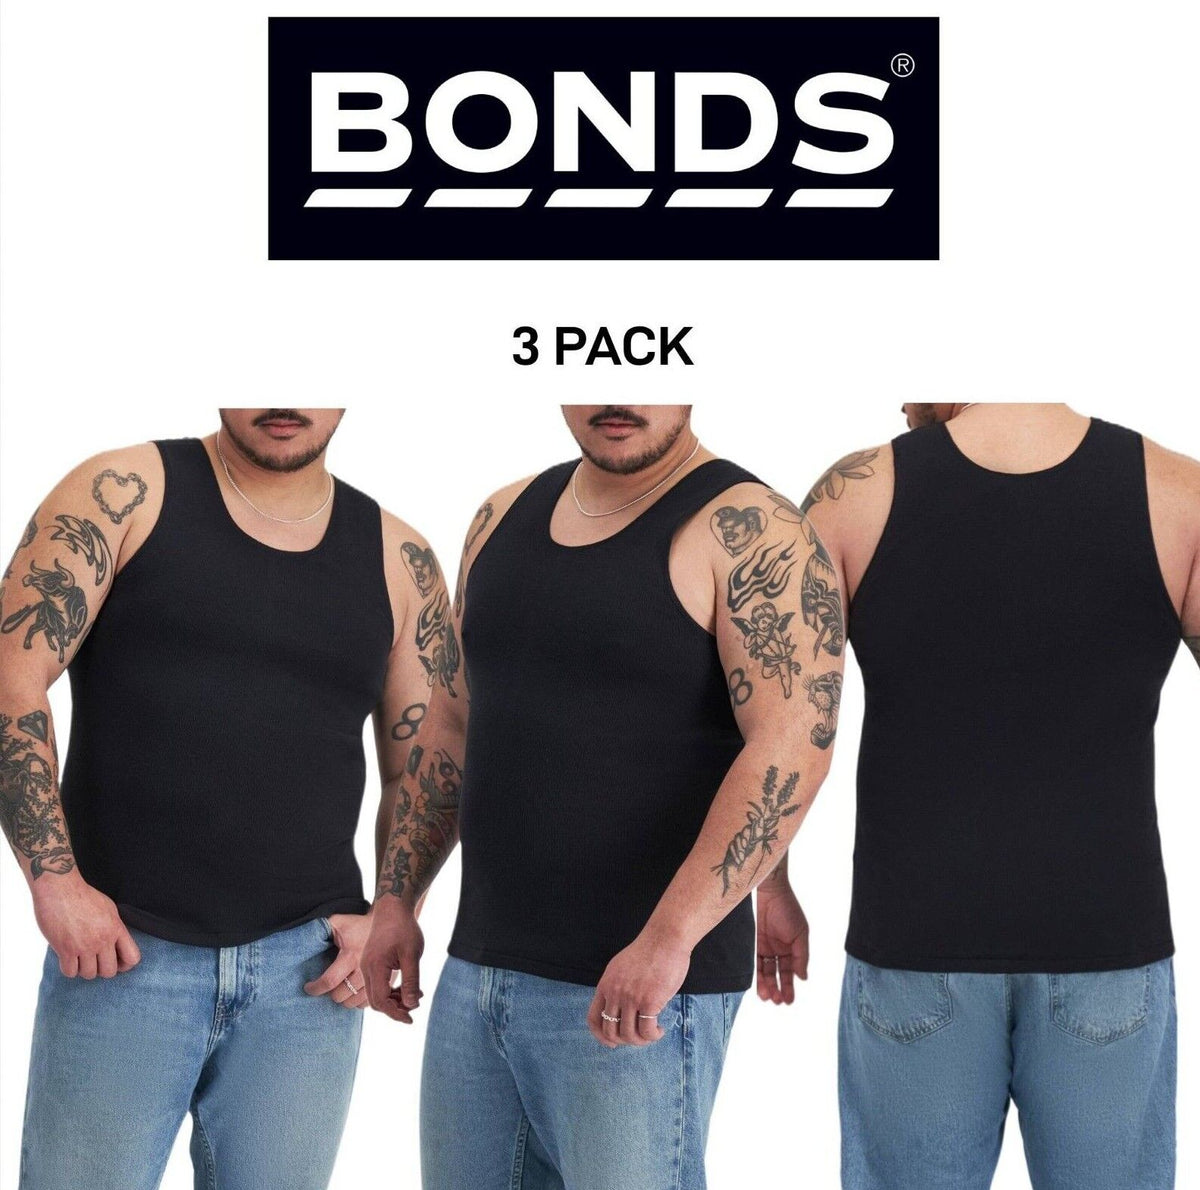 Bonds Mens Chesty Singlets Cotton Side Seamfree Comfortable Fit 3 Pack M757O